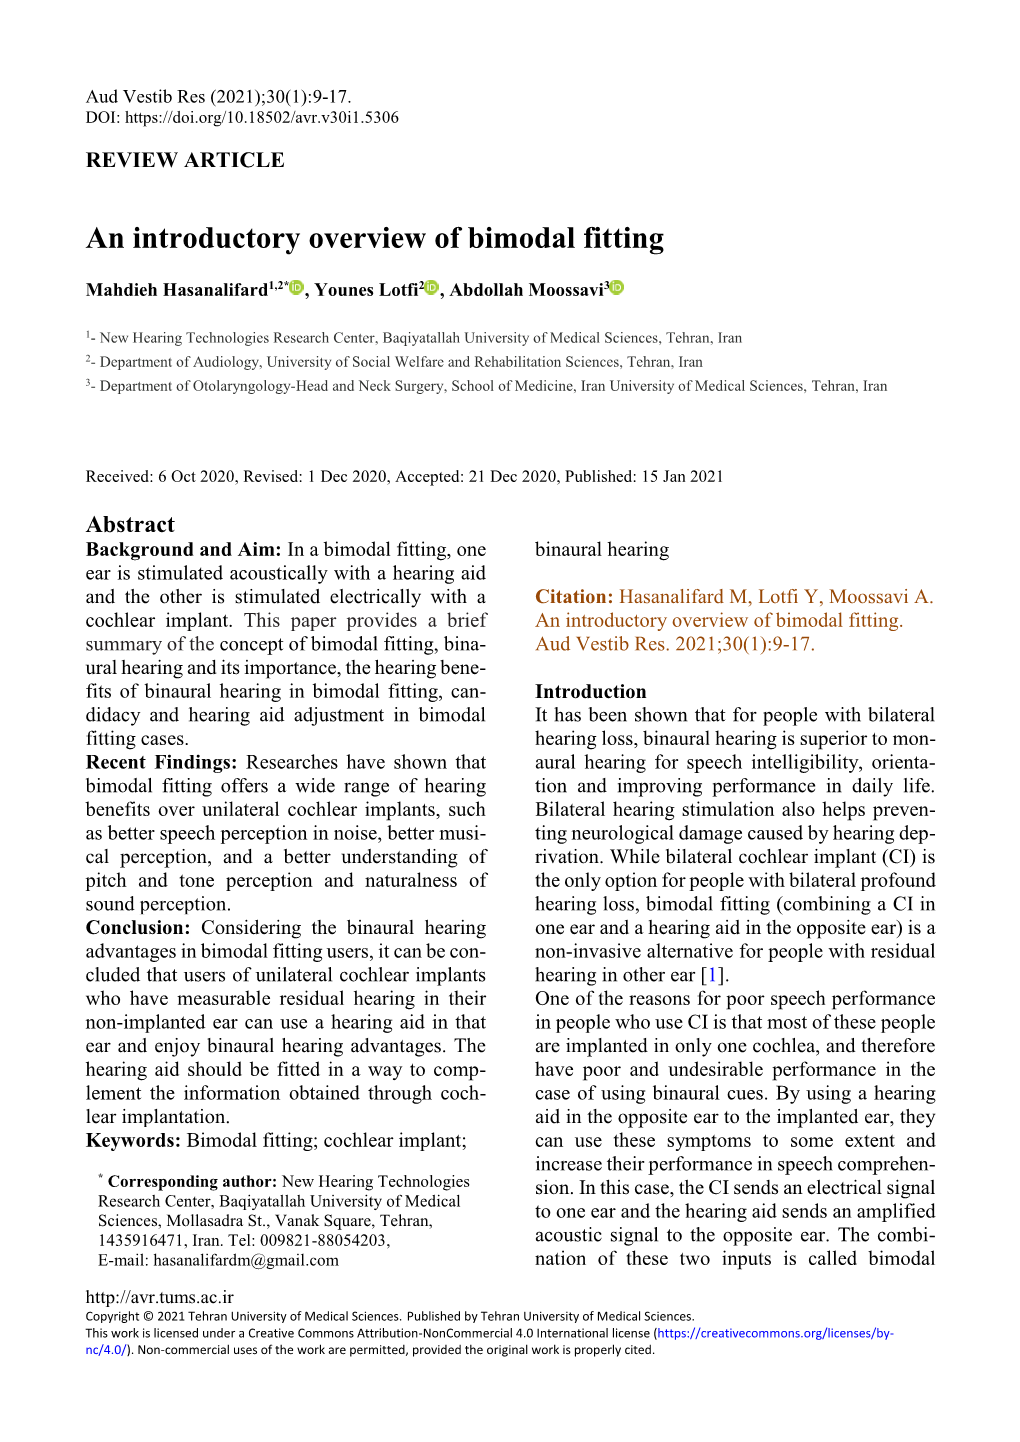 An Introductory Overview of Bimodal Fitting